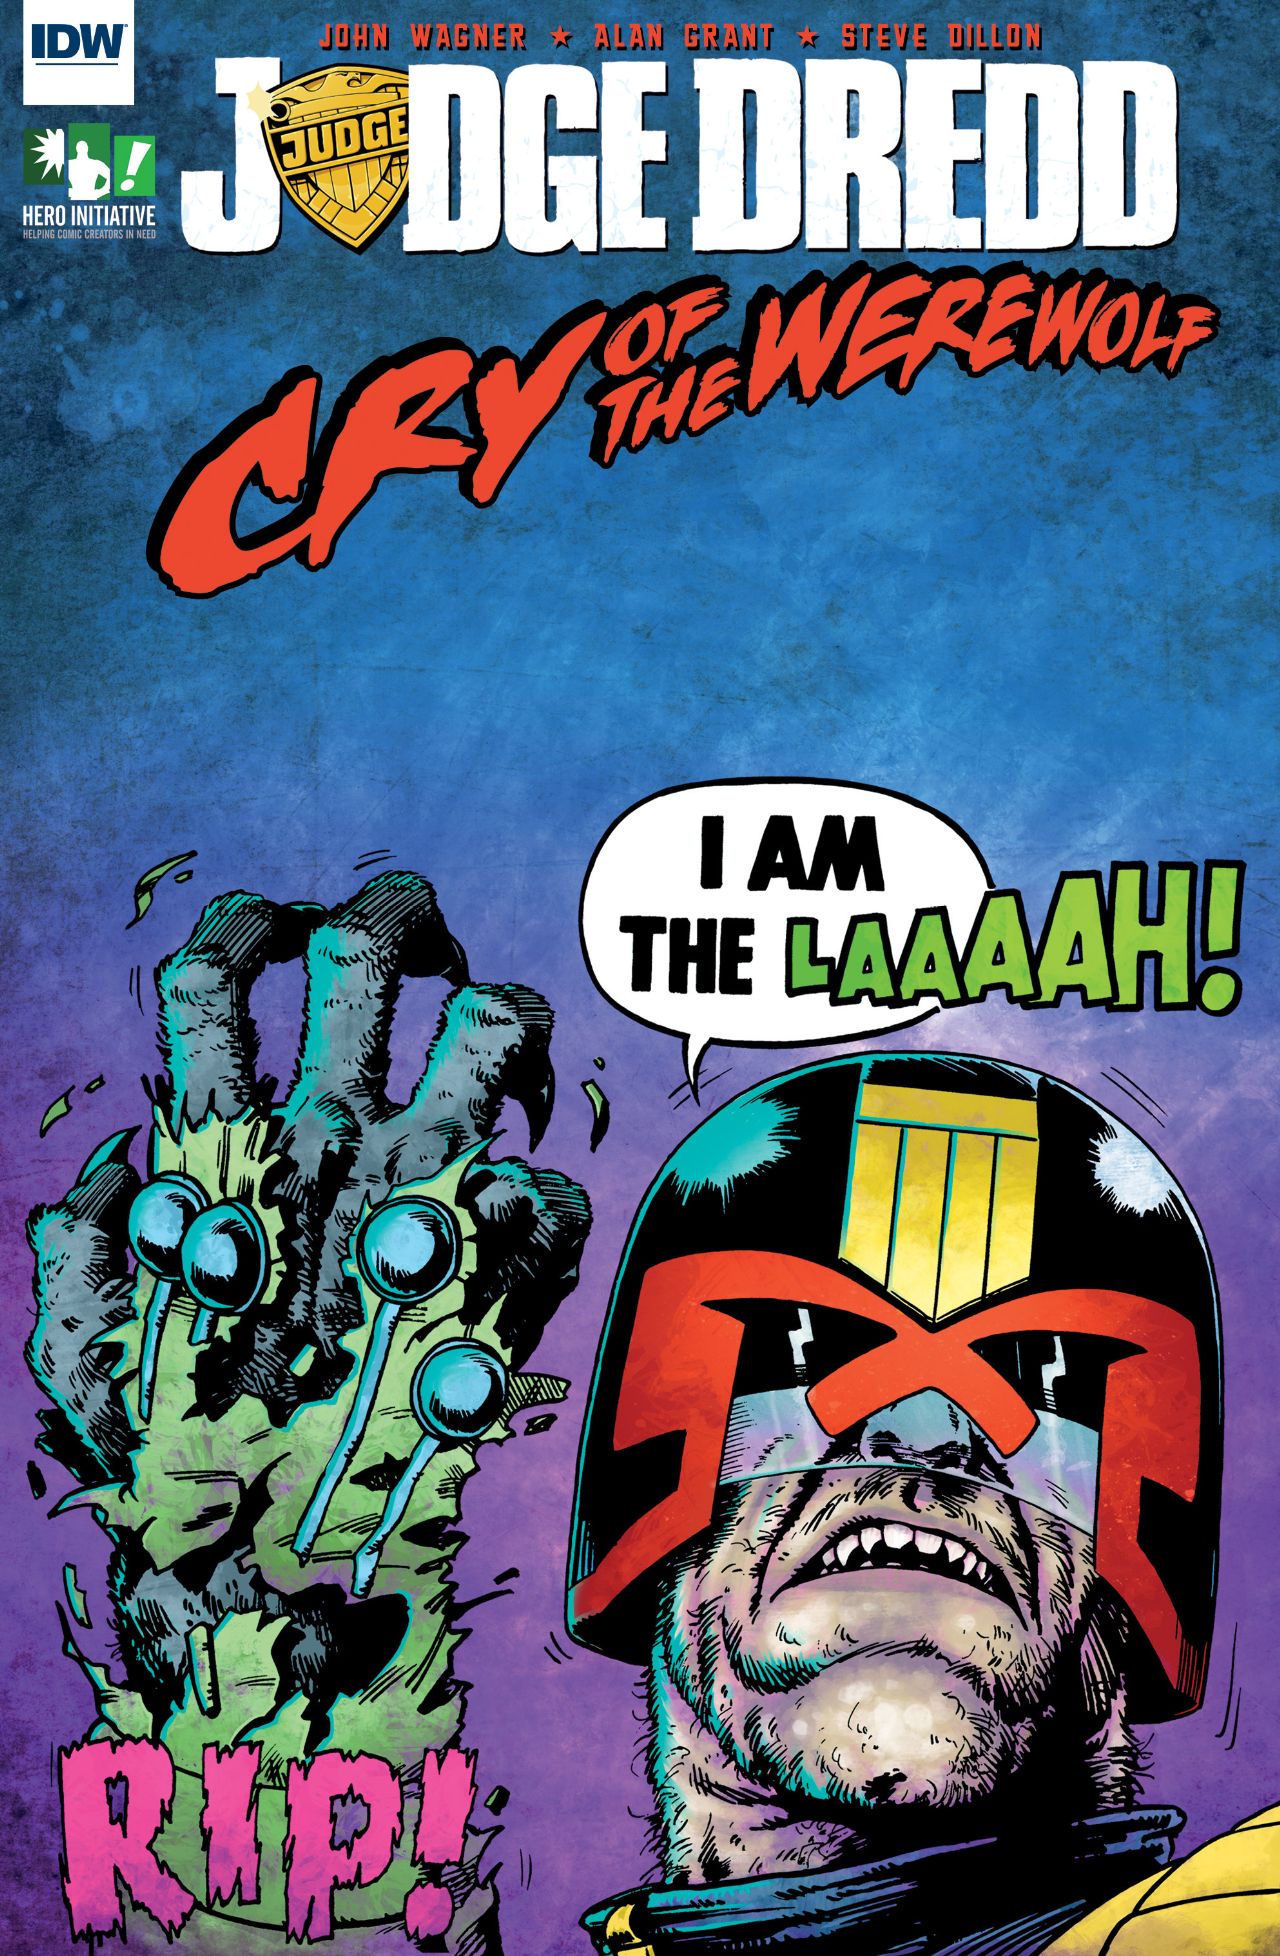 Judge Dredd: Cry of the Werewolf Review